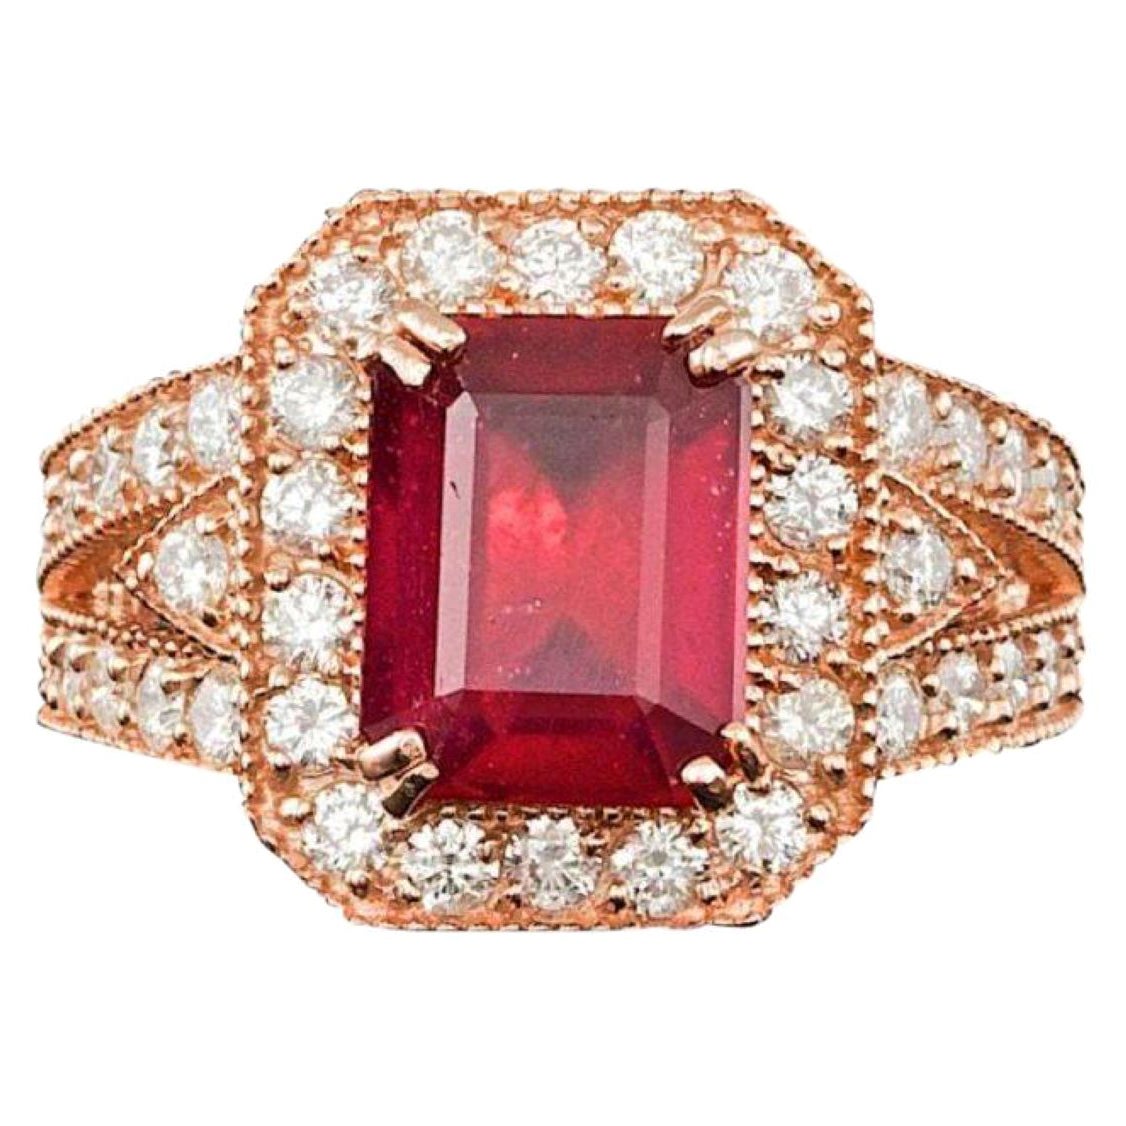 5.10 Carats Natural Red Ruby and Diamond 14K Solid Rose Gold Ring